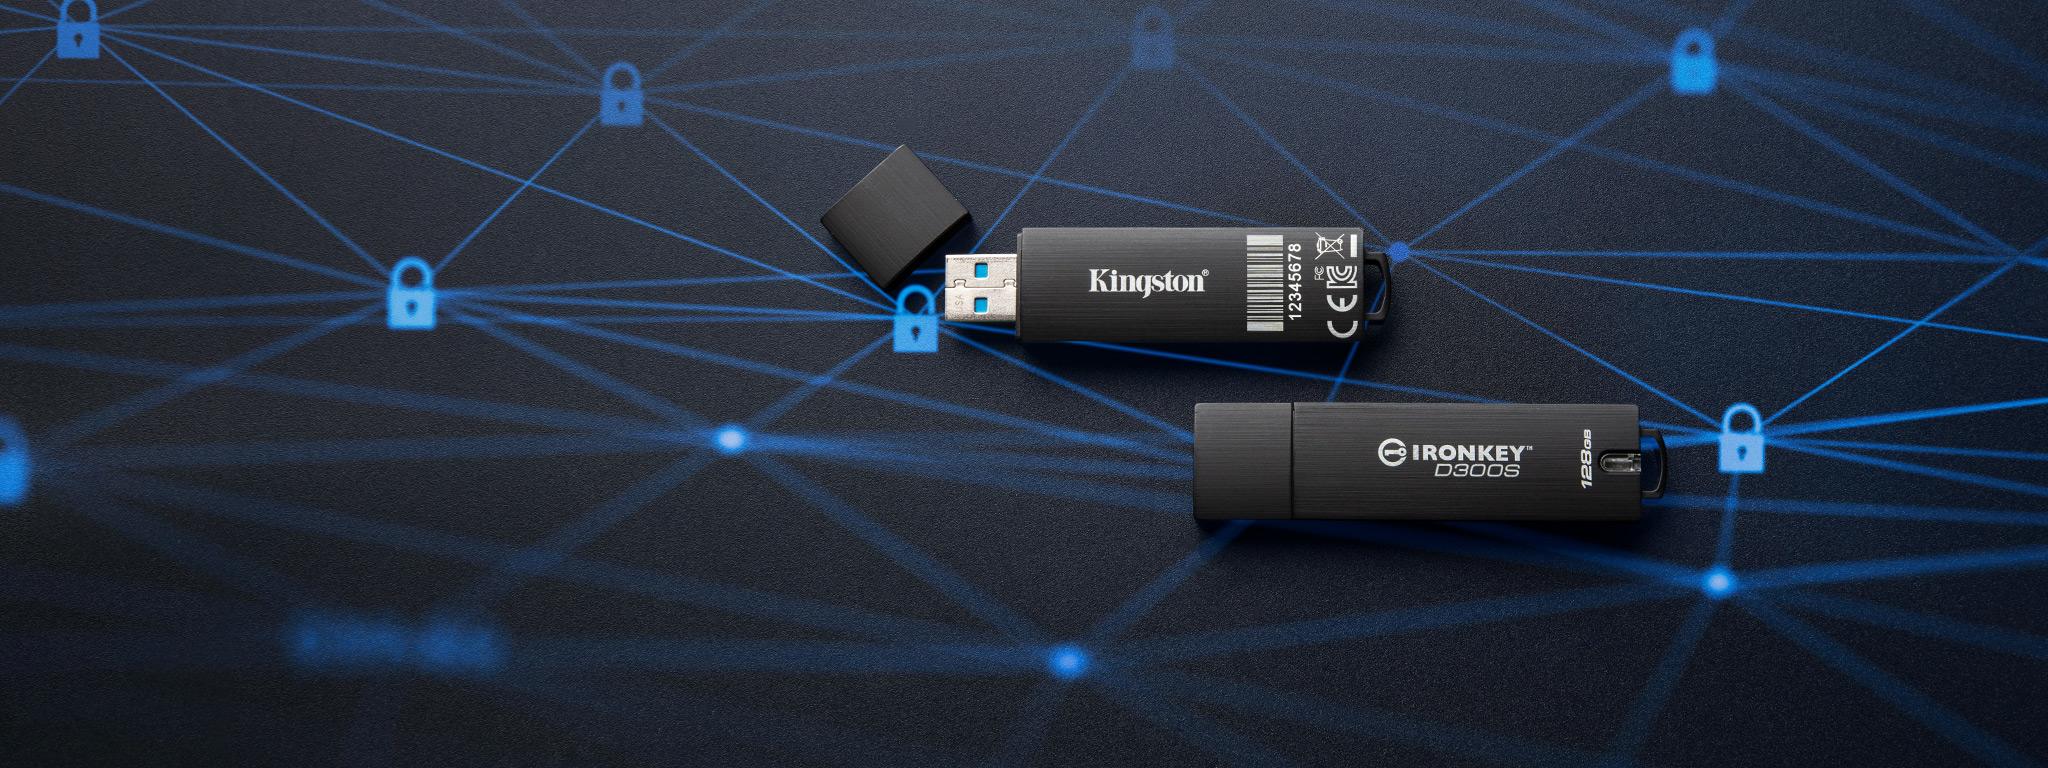 A pair of IronKey D300S USB flash drives sit on a black surface with lock icon graphics in blue